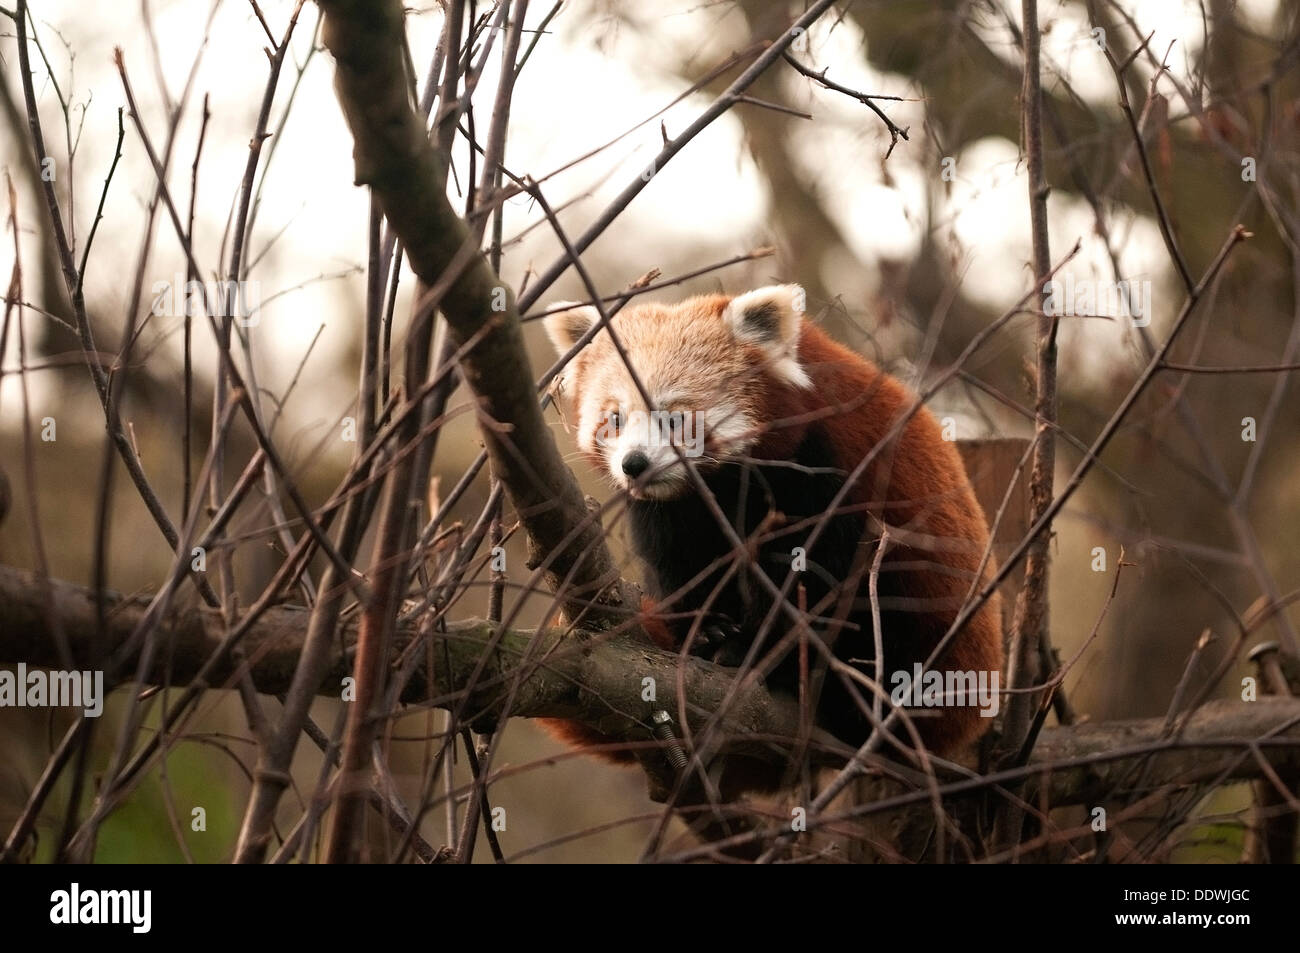 The red panda (Ailurus fulgens), also called lesser panda and red cat-bear, is a small arboreal mammal. Stock Photo